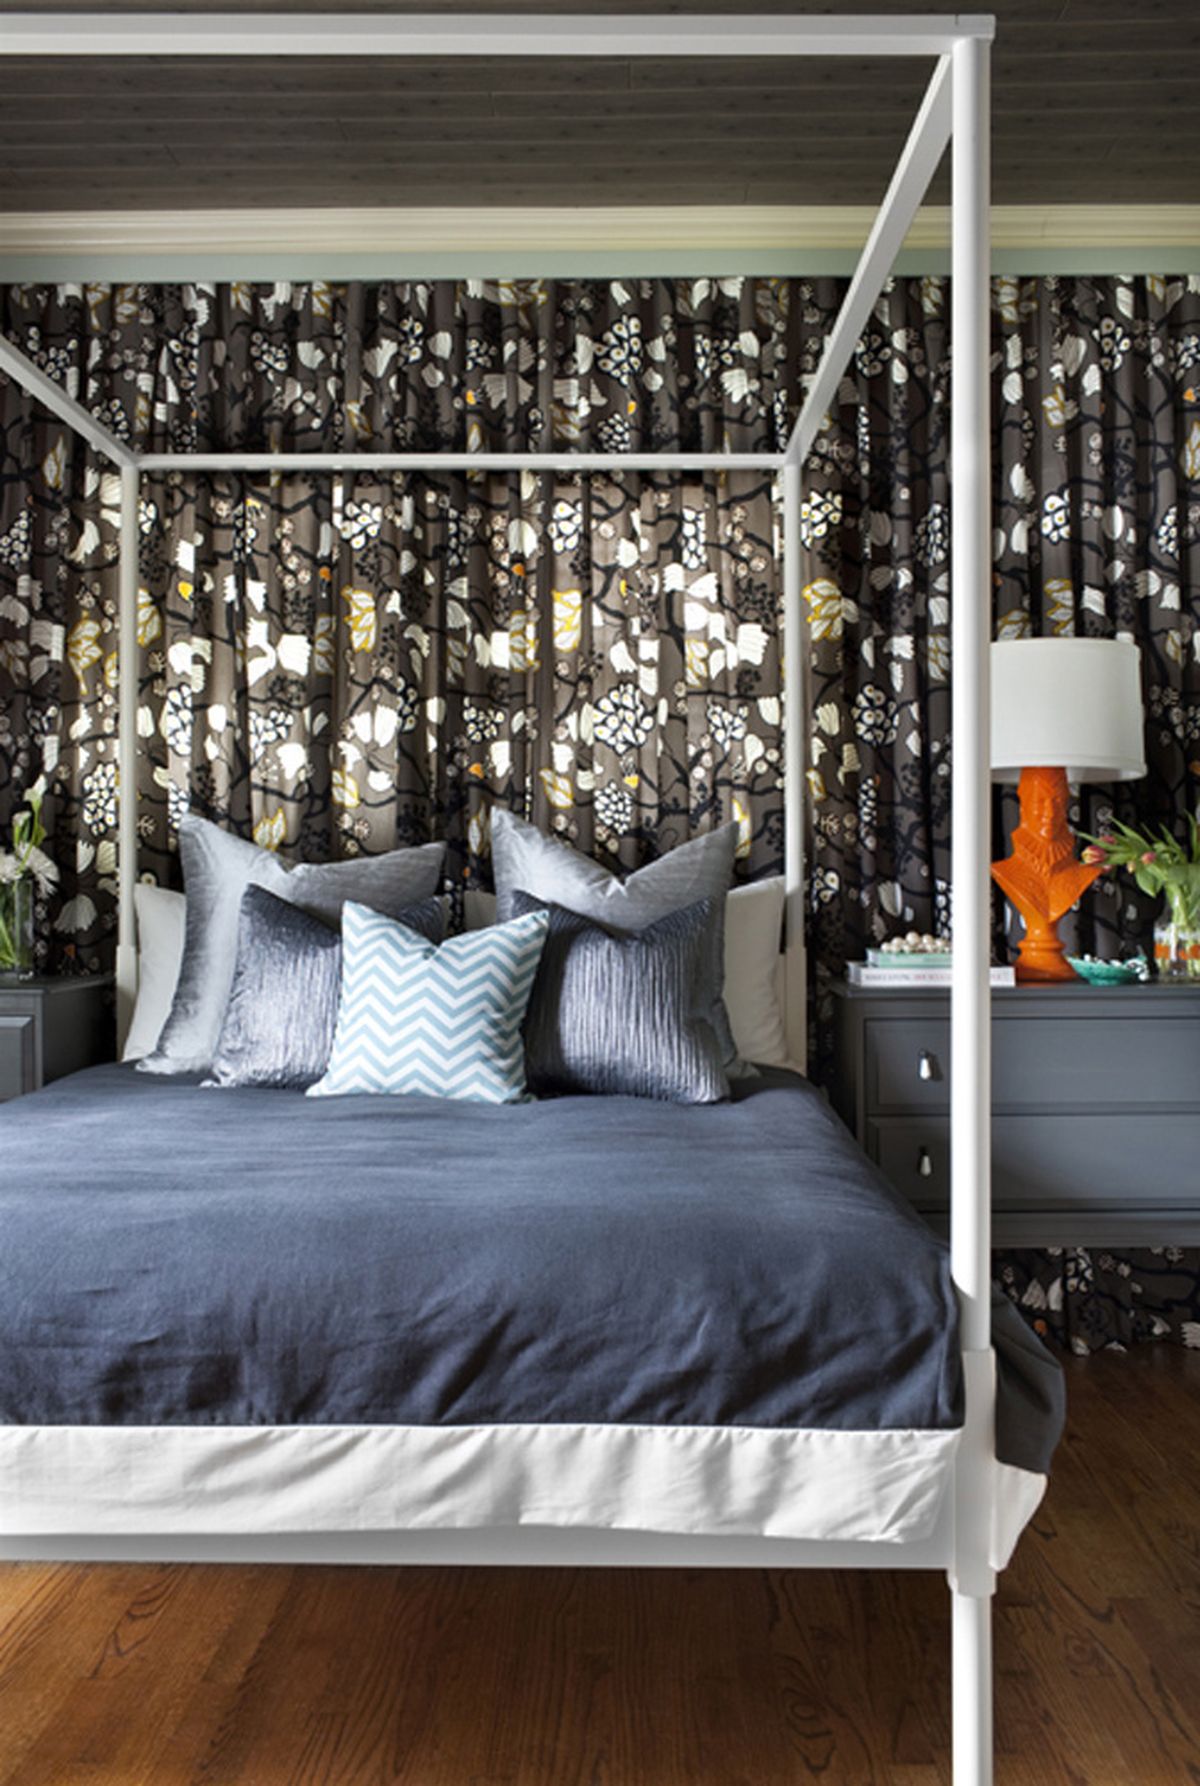 To keep tween bedrooms equally as appealing to parents, designer Brian Patrick Flynn often uses gender-neutral grays, greens and oranges as well as a mix of metallics and bold patterns. 